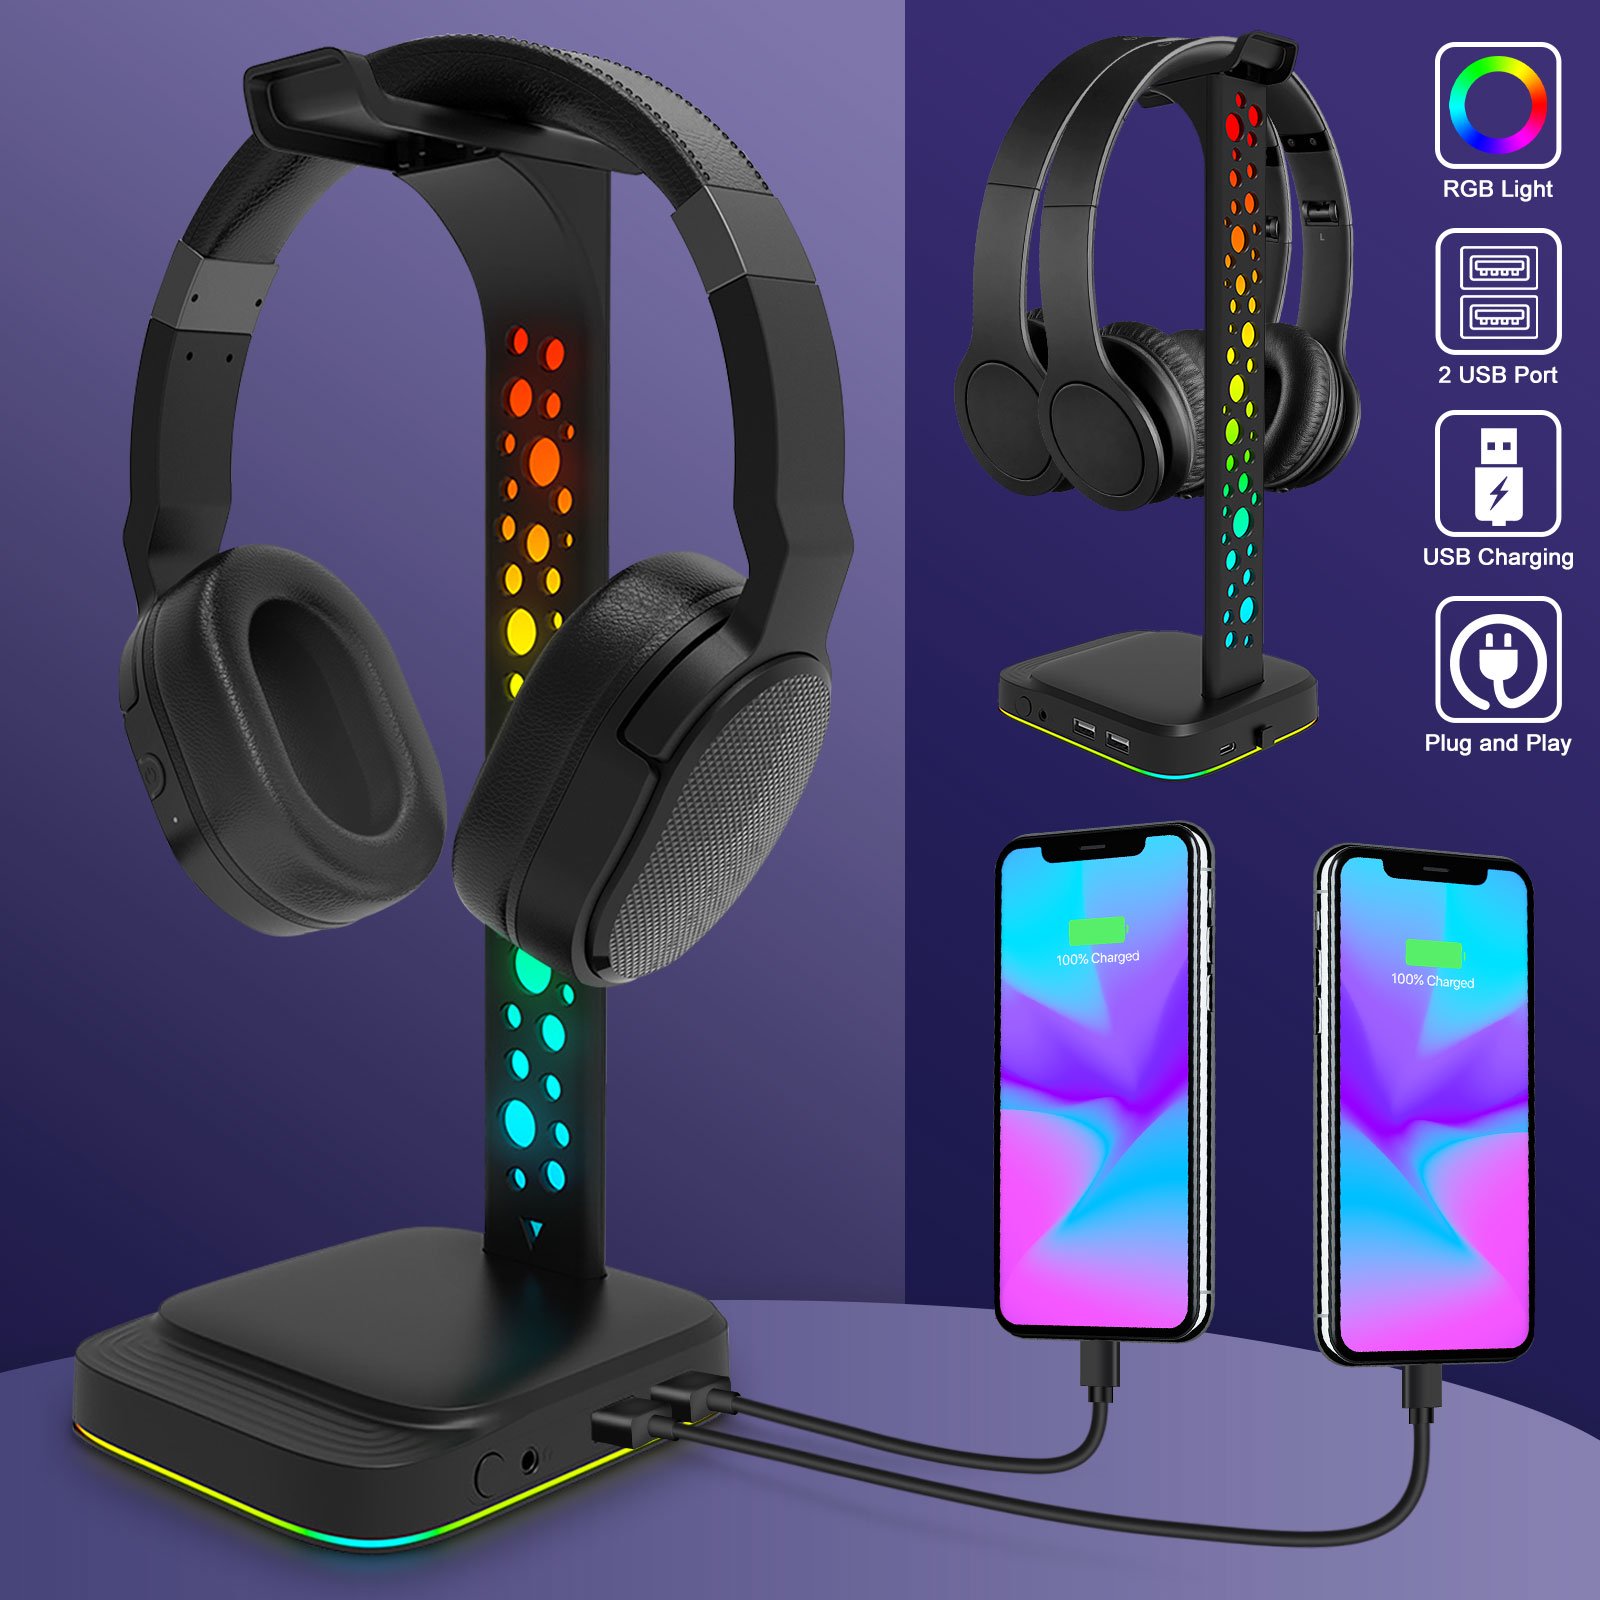 Headphones-Gaming-Headset-Stand-RGB-Headphone-Stand-with-3-5mm-AUX-2-USB-Charging-Ports-Headphone-Holder-with-10-Light-Modes-Gaming-Headset-for-Gamers-PC-21